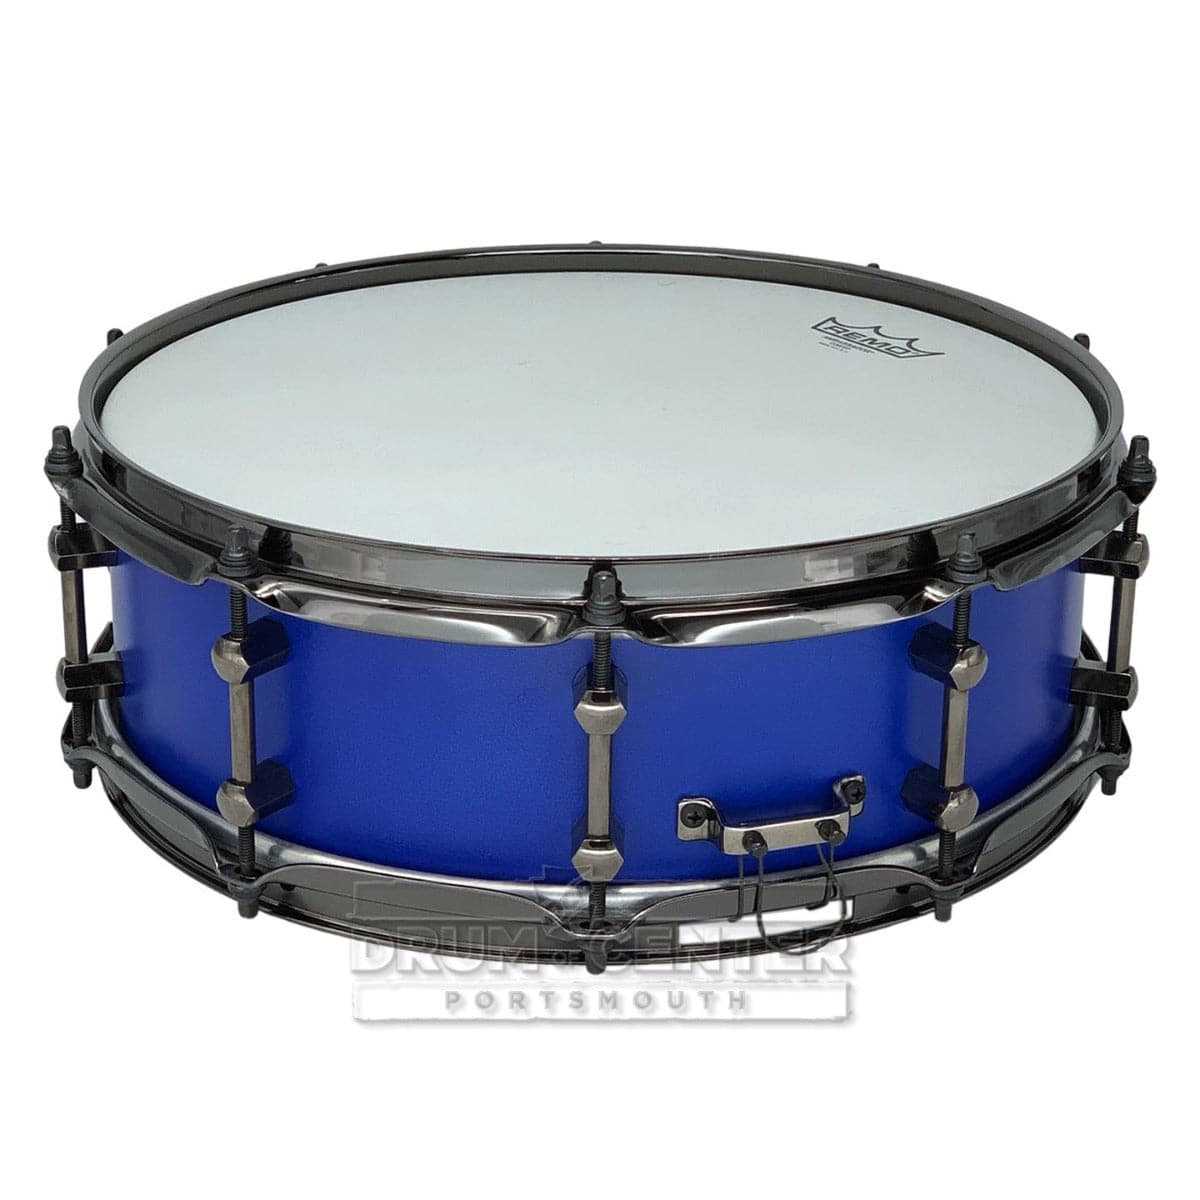 Noble & Cooley Alloy Classic Painted Snare Drum 14x4.75 Flat Royal Blue w/Black Hw